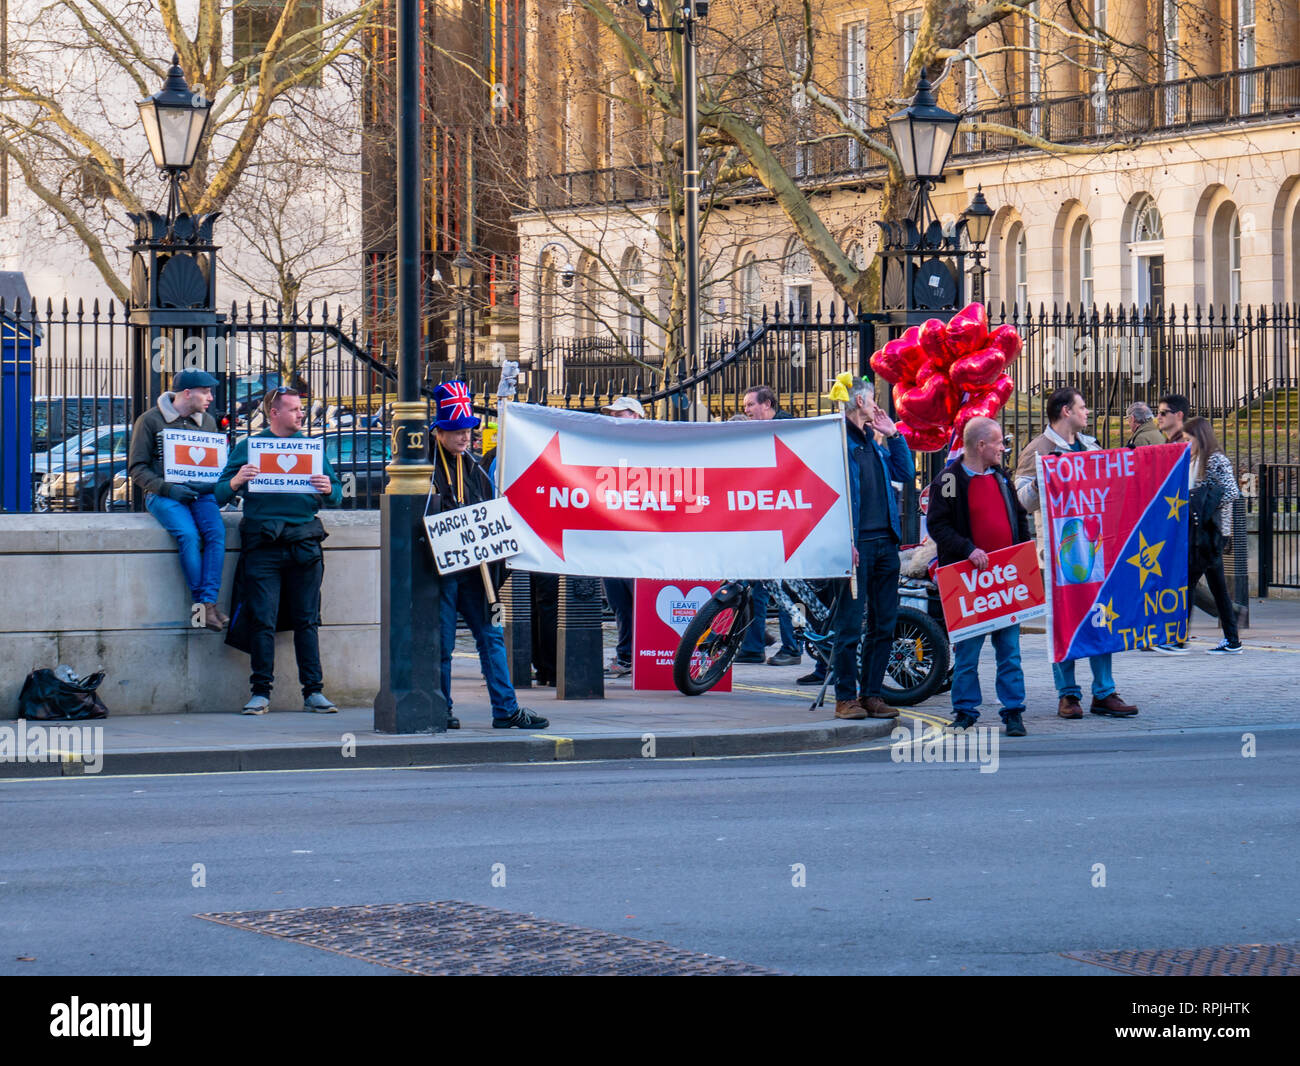 London, England - February 14, 2019: Group of people protesting in front of Parliament house on the street to sustain the Brexit of England out of Eur Stock Photo